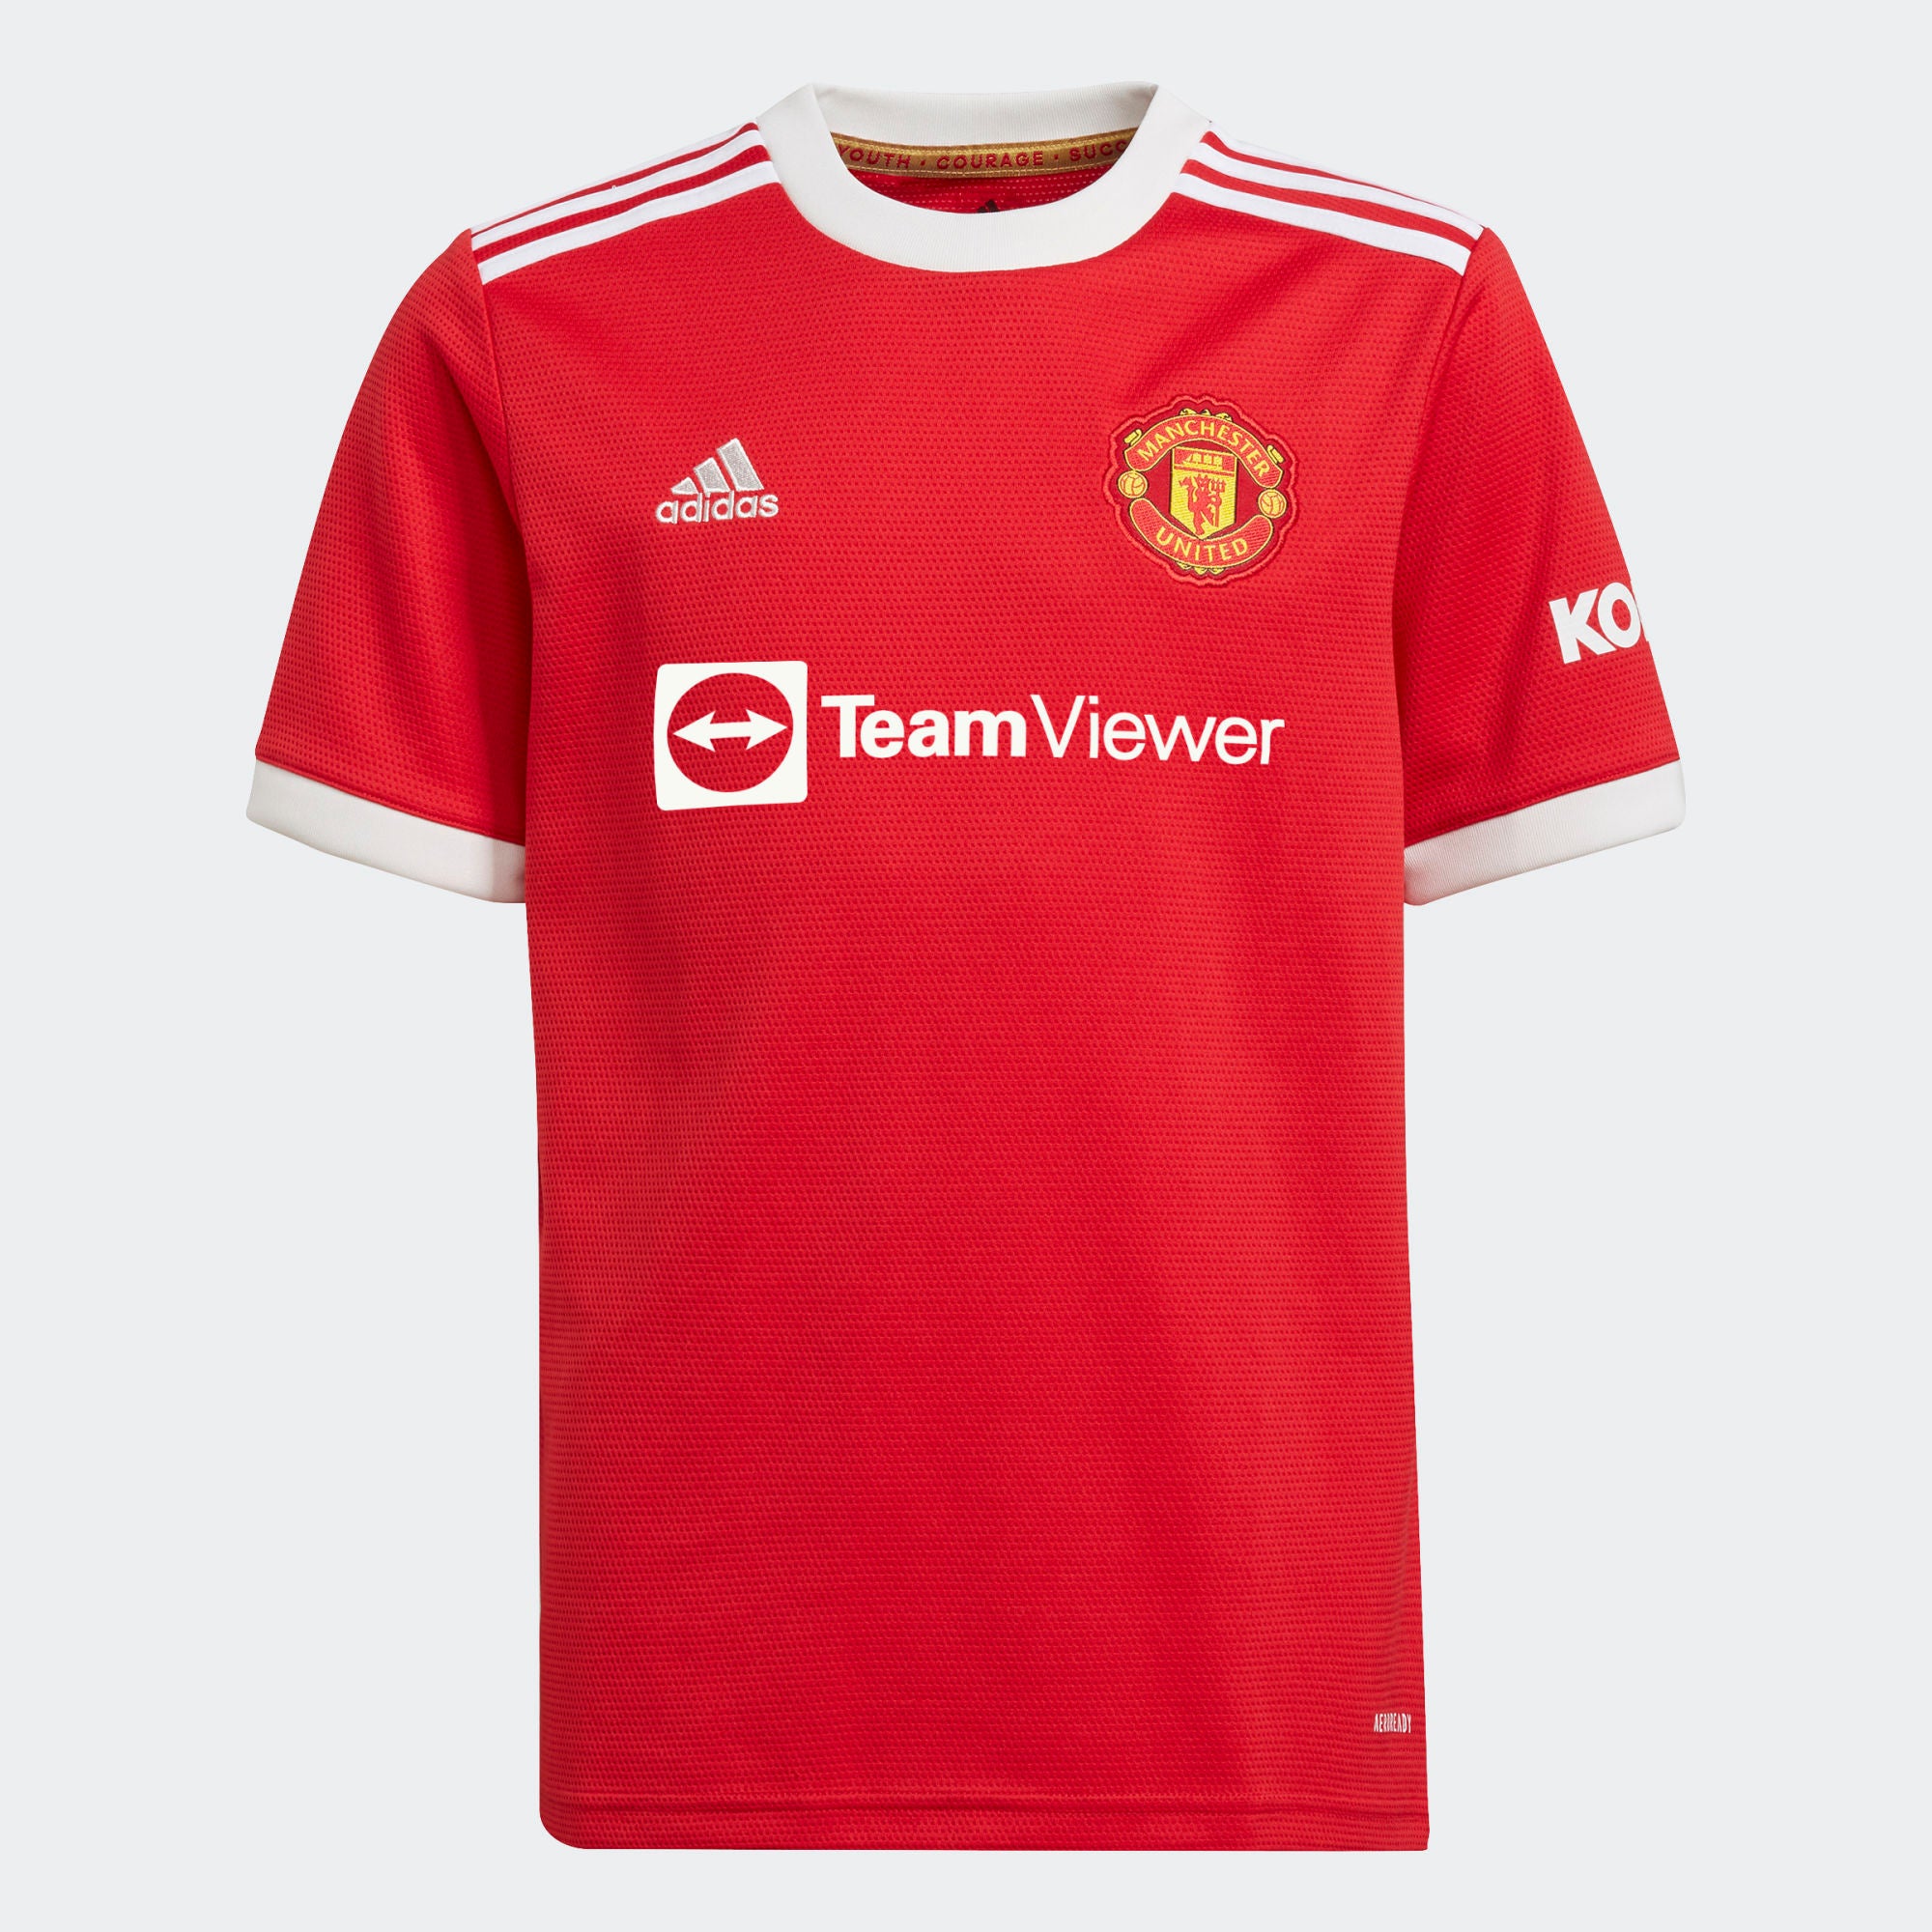 manchester united youth jersey 2019/20